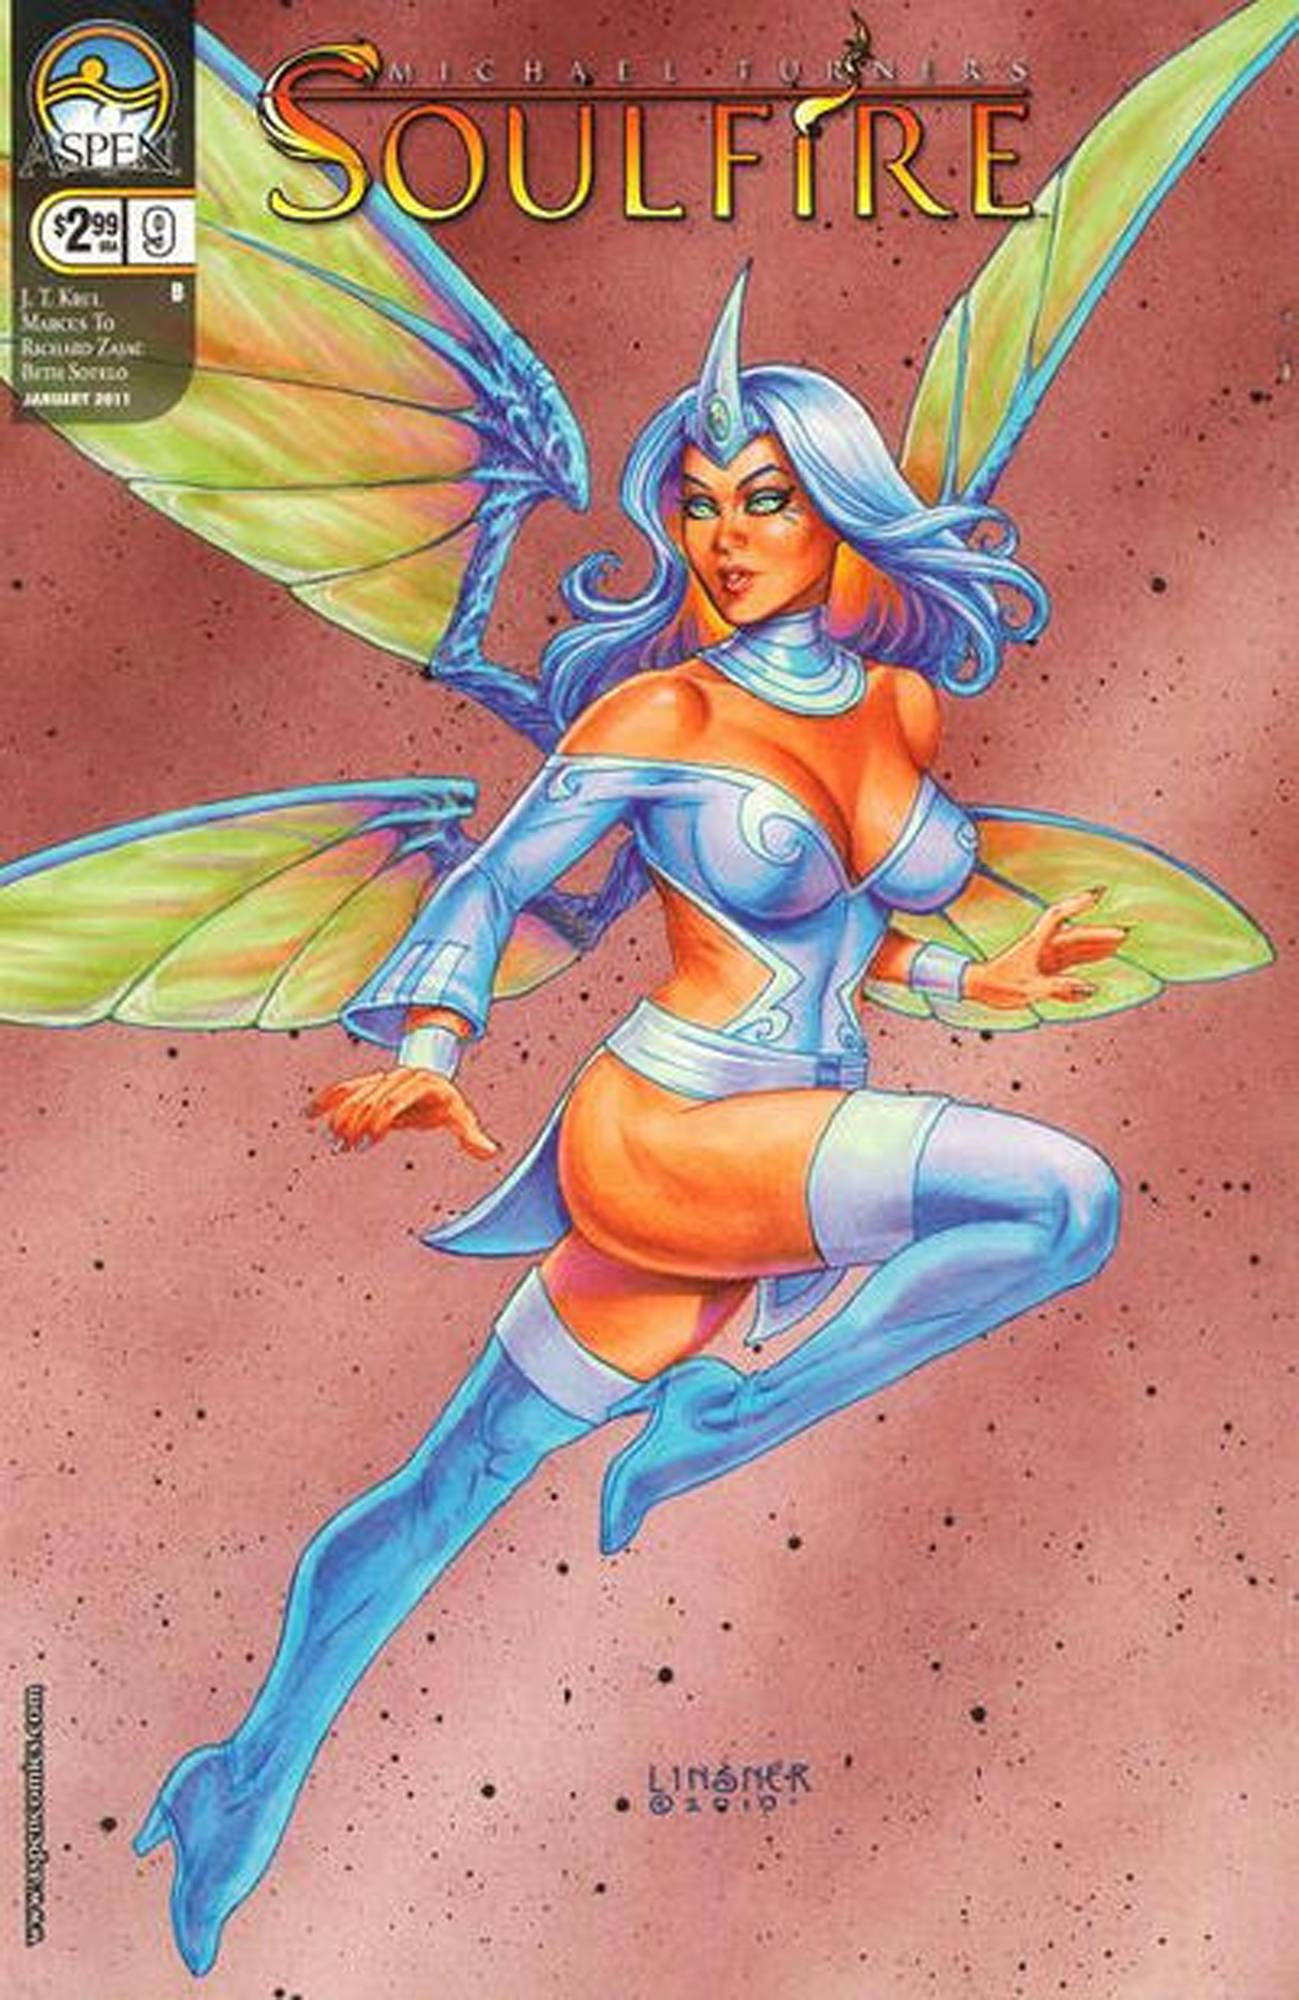 Soulfire Volume Two #9 Cover B Linsner